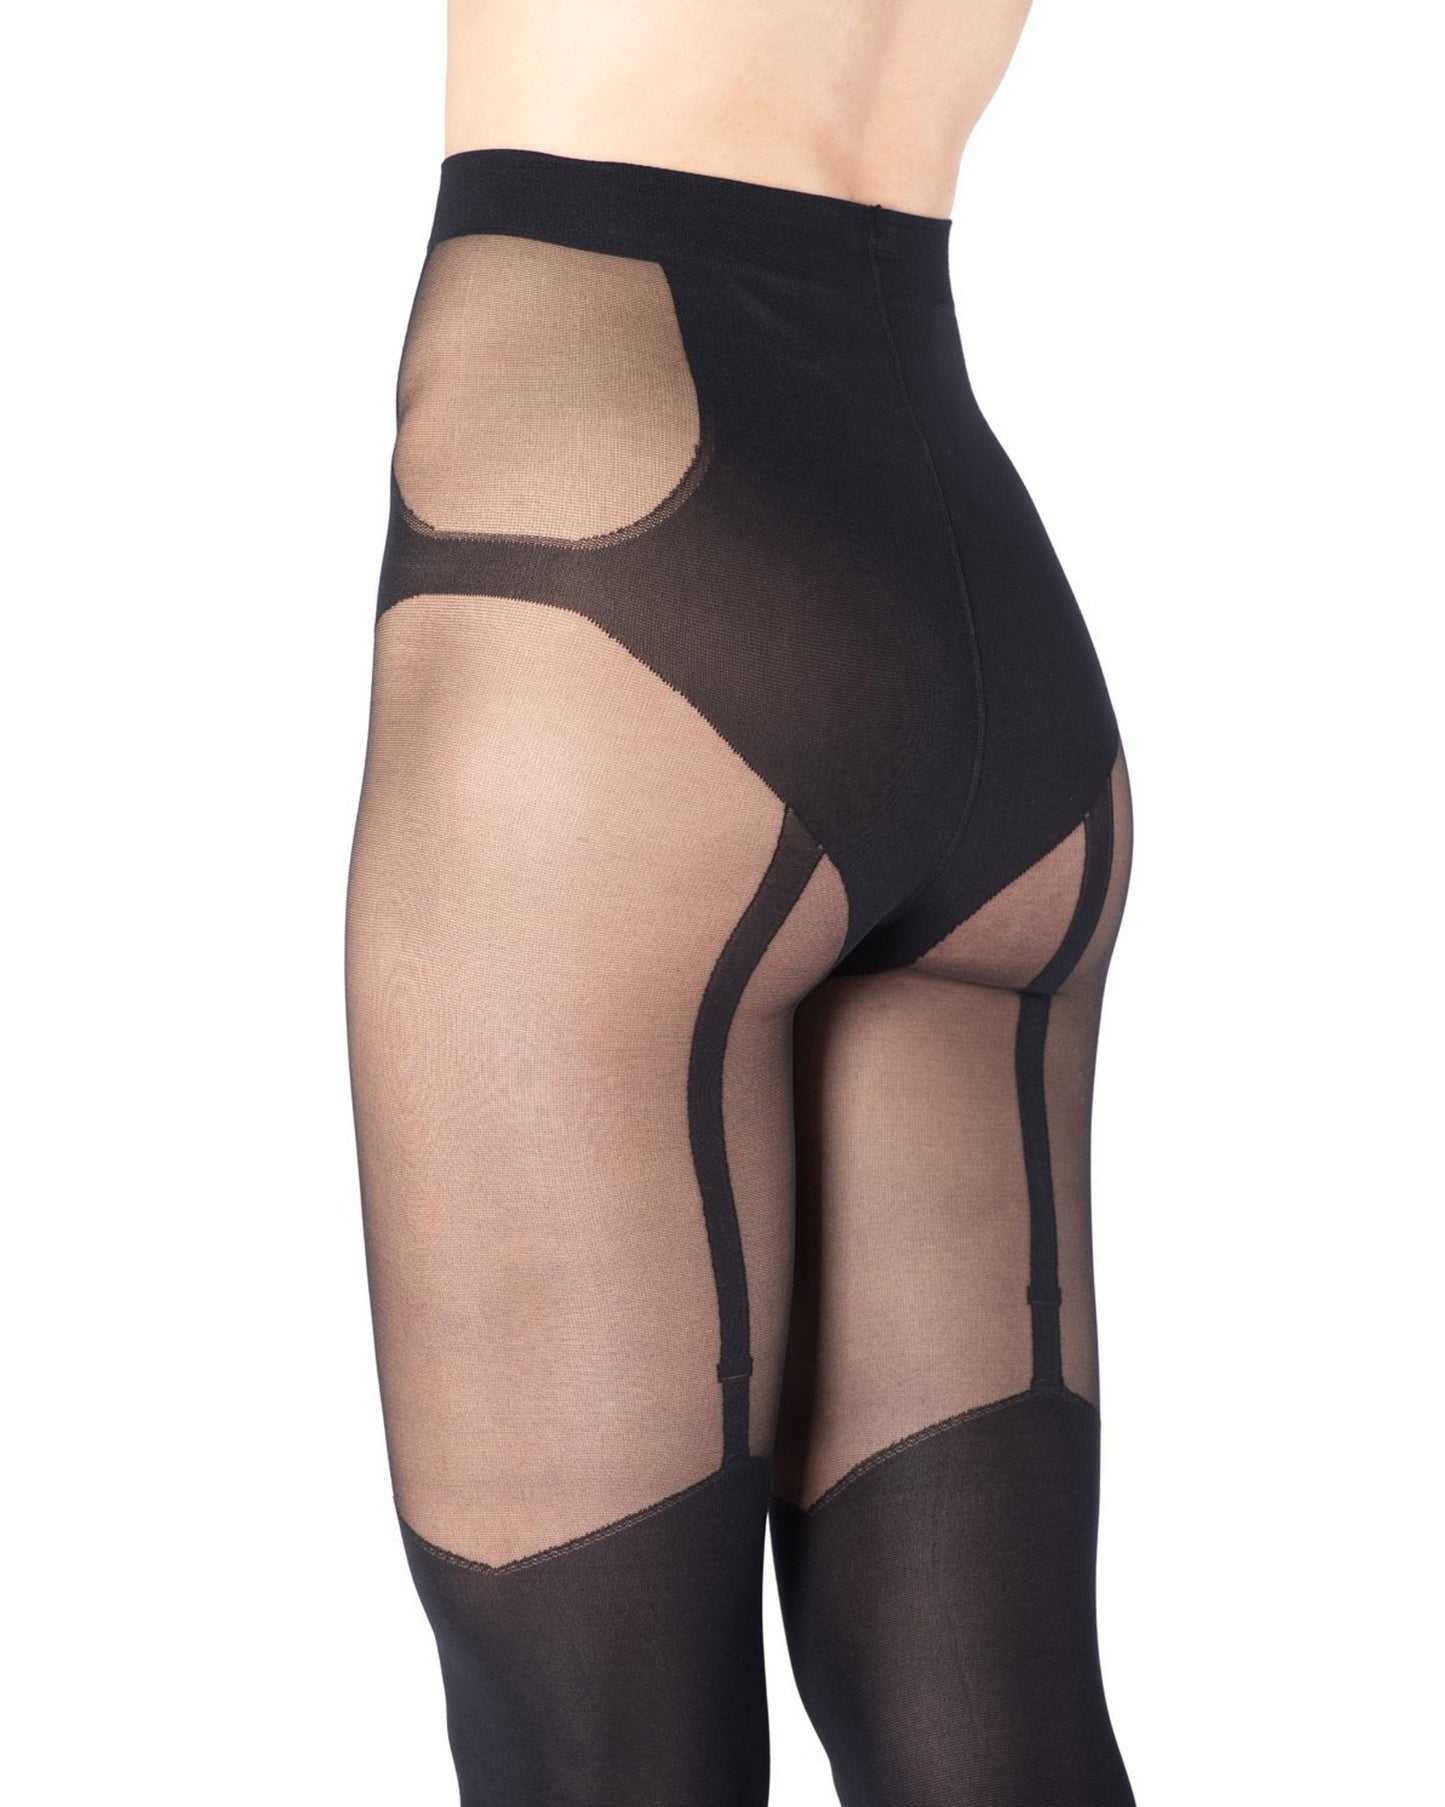 Emilio Cavallini Illusion Garter Tights - Sheer black fashion tights with an opaque faux over the knee stocking with suspender brief detail, flat seams and gusset.